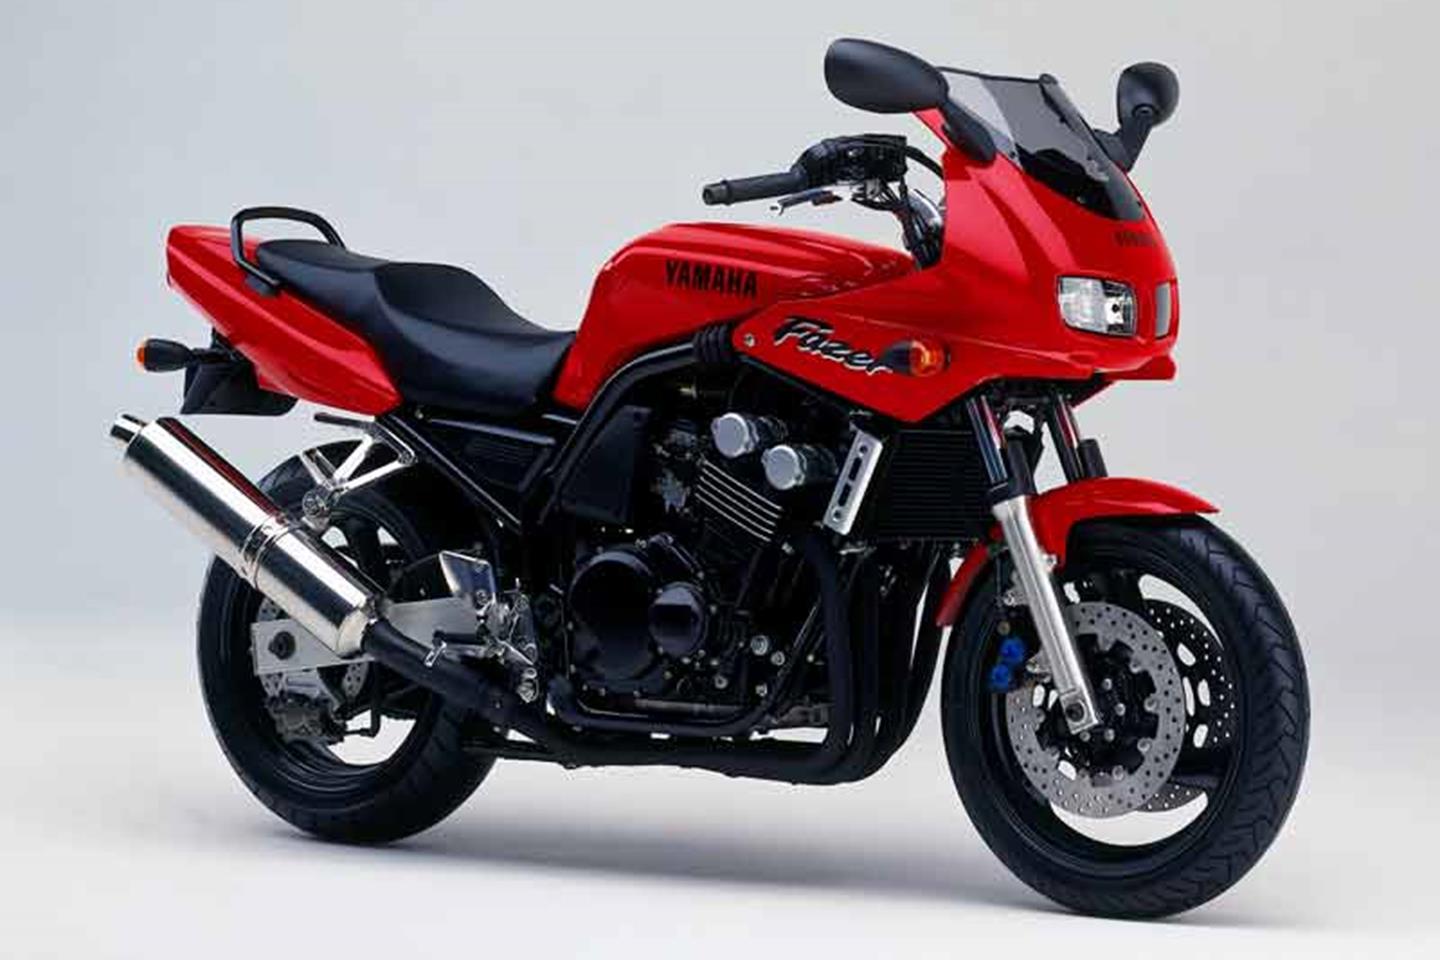 Yamaha Fazer 600 (1998-2004) review & used buying guide | MCN